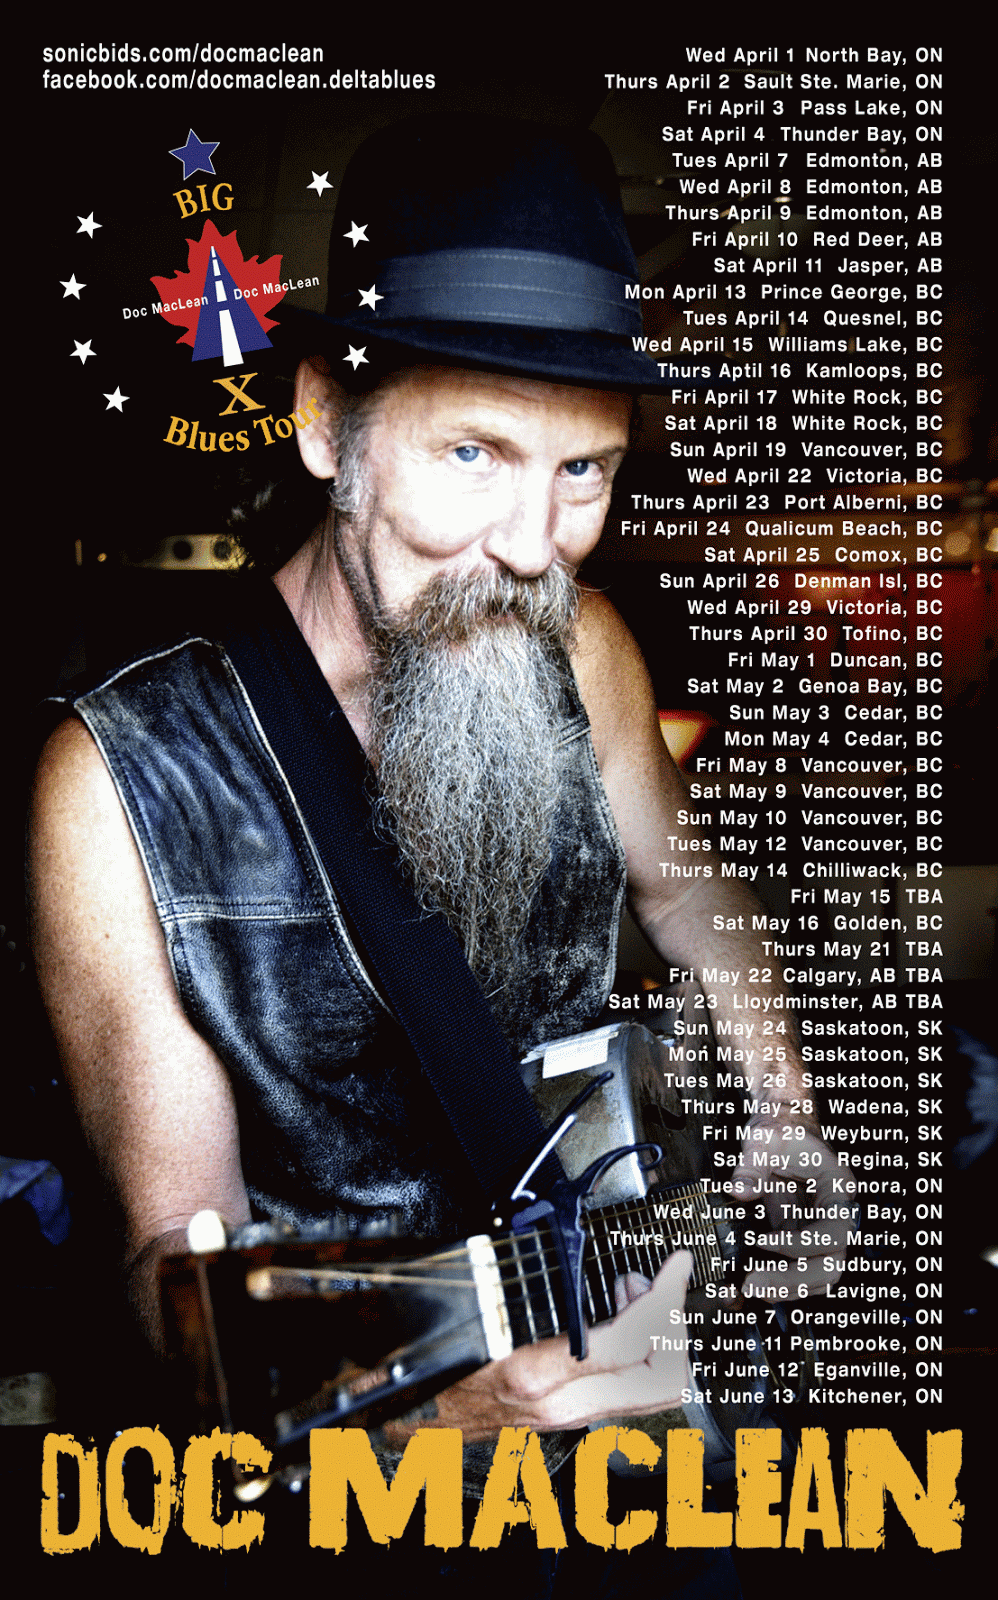 Tour Poster, western/central dates